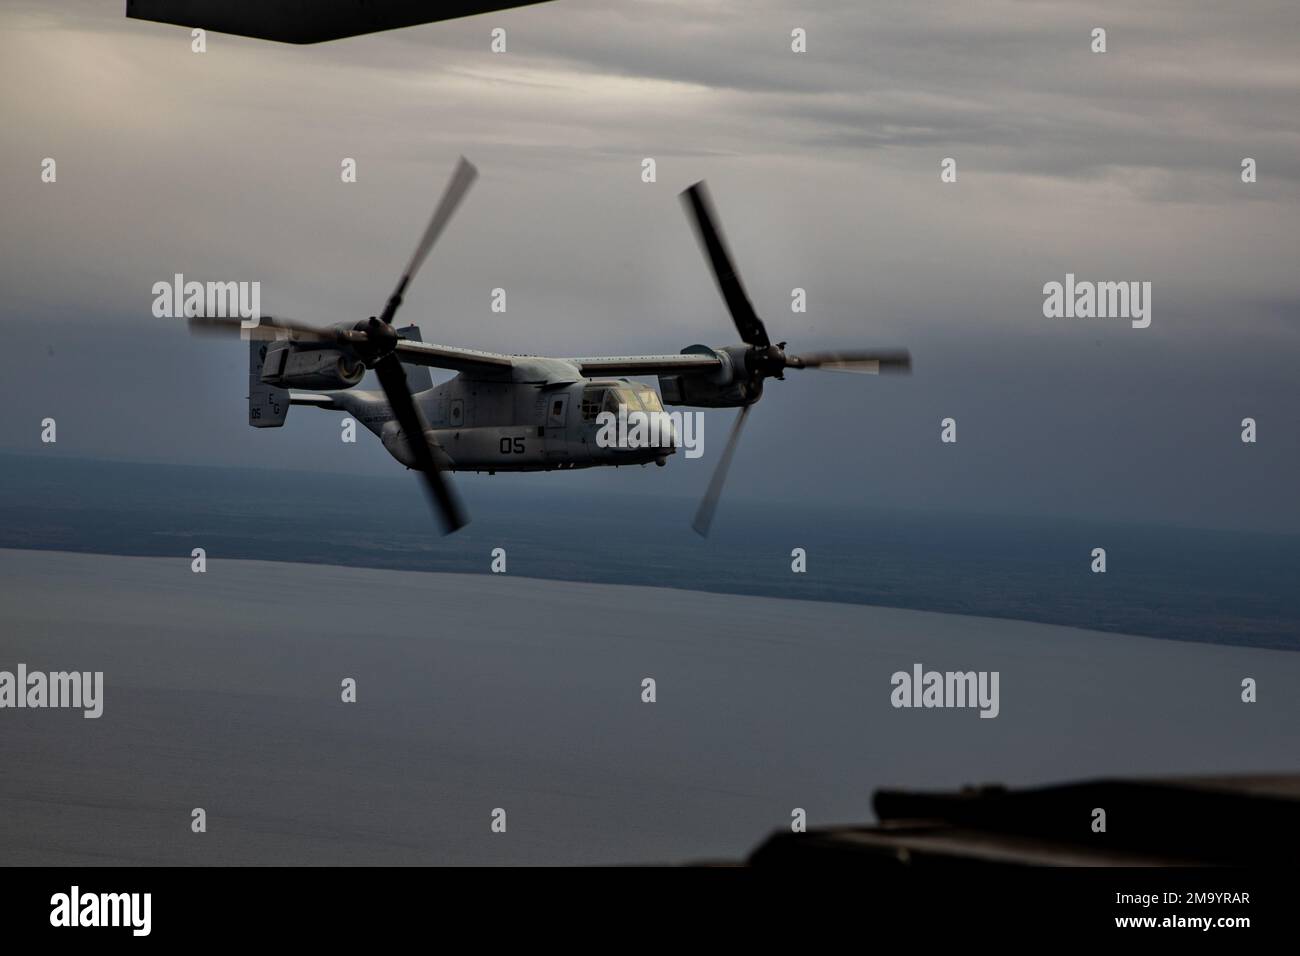 A U.S. Marine Corps MV-22 Osprey, assigned to the Aviation Combat Element, 22nd Marine Expeditionary Unit, travels from Parnu Airfield, Parnu, Estonia, back to Wasp-class amphibious assault ship USS Kearsarge (LHD 3), during ship-to-shore movements, May 21, 2022. The 22nd MEU is participating in the Estonian-led exercise Siil 22 (Hedgehog 22 in English). Hedgehog 22 brings together members of the Estonian Defense Force and Sailors and Marines under Commander Task Force 61/2 to enhance allied interoperability and preserve security and stability in the Baltic region. Stock Photo